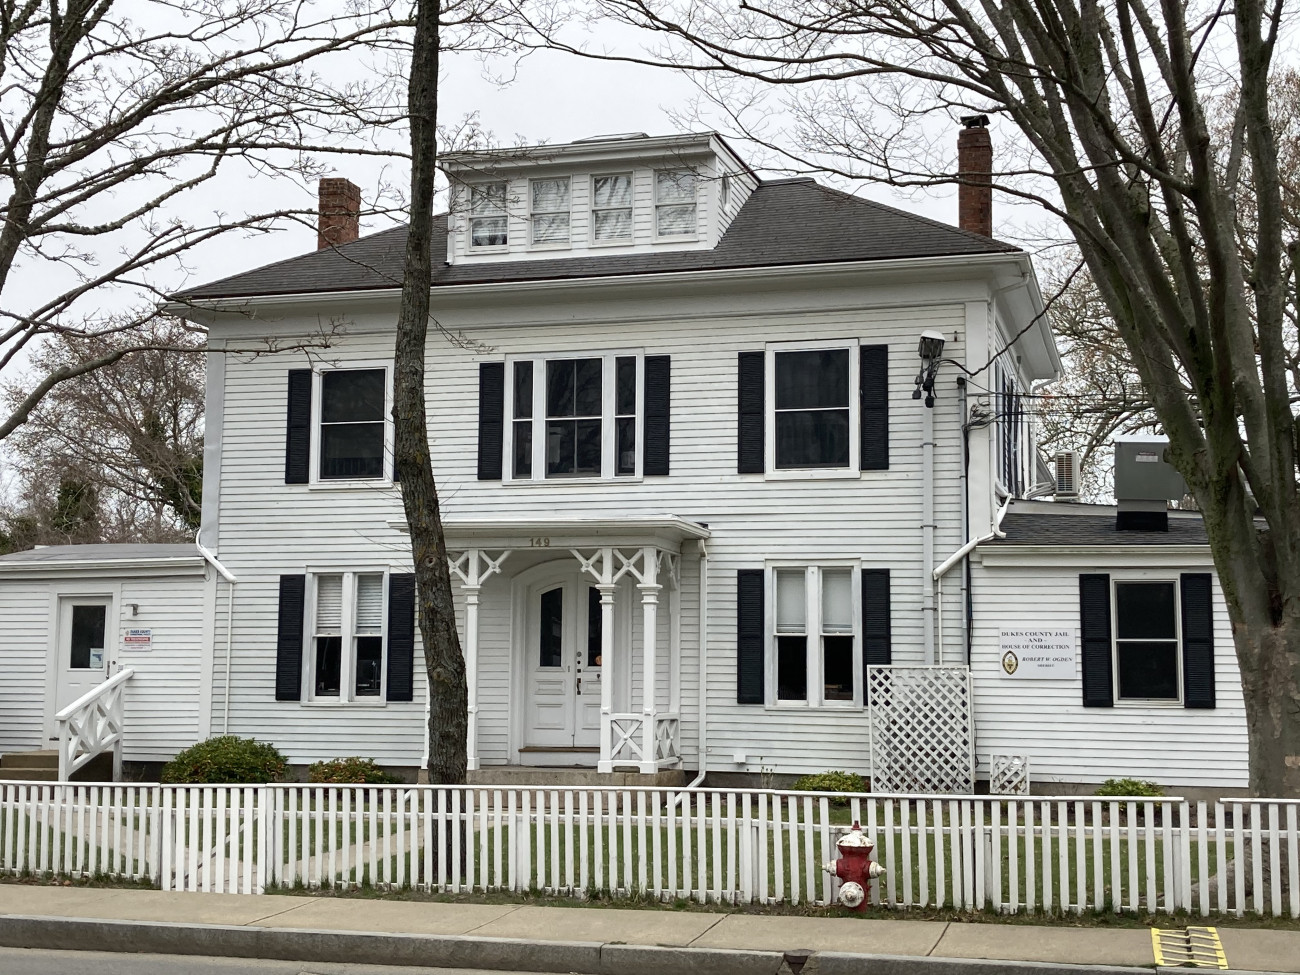 A white two-story building, with an attic, stands.  Black shutters.  White picket fence in front.